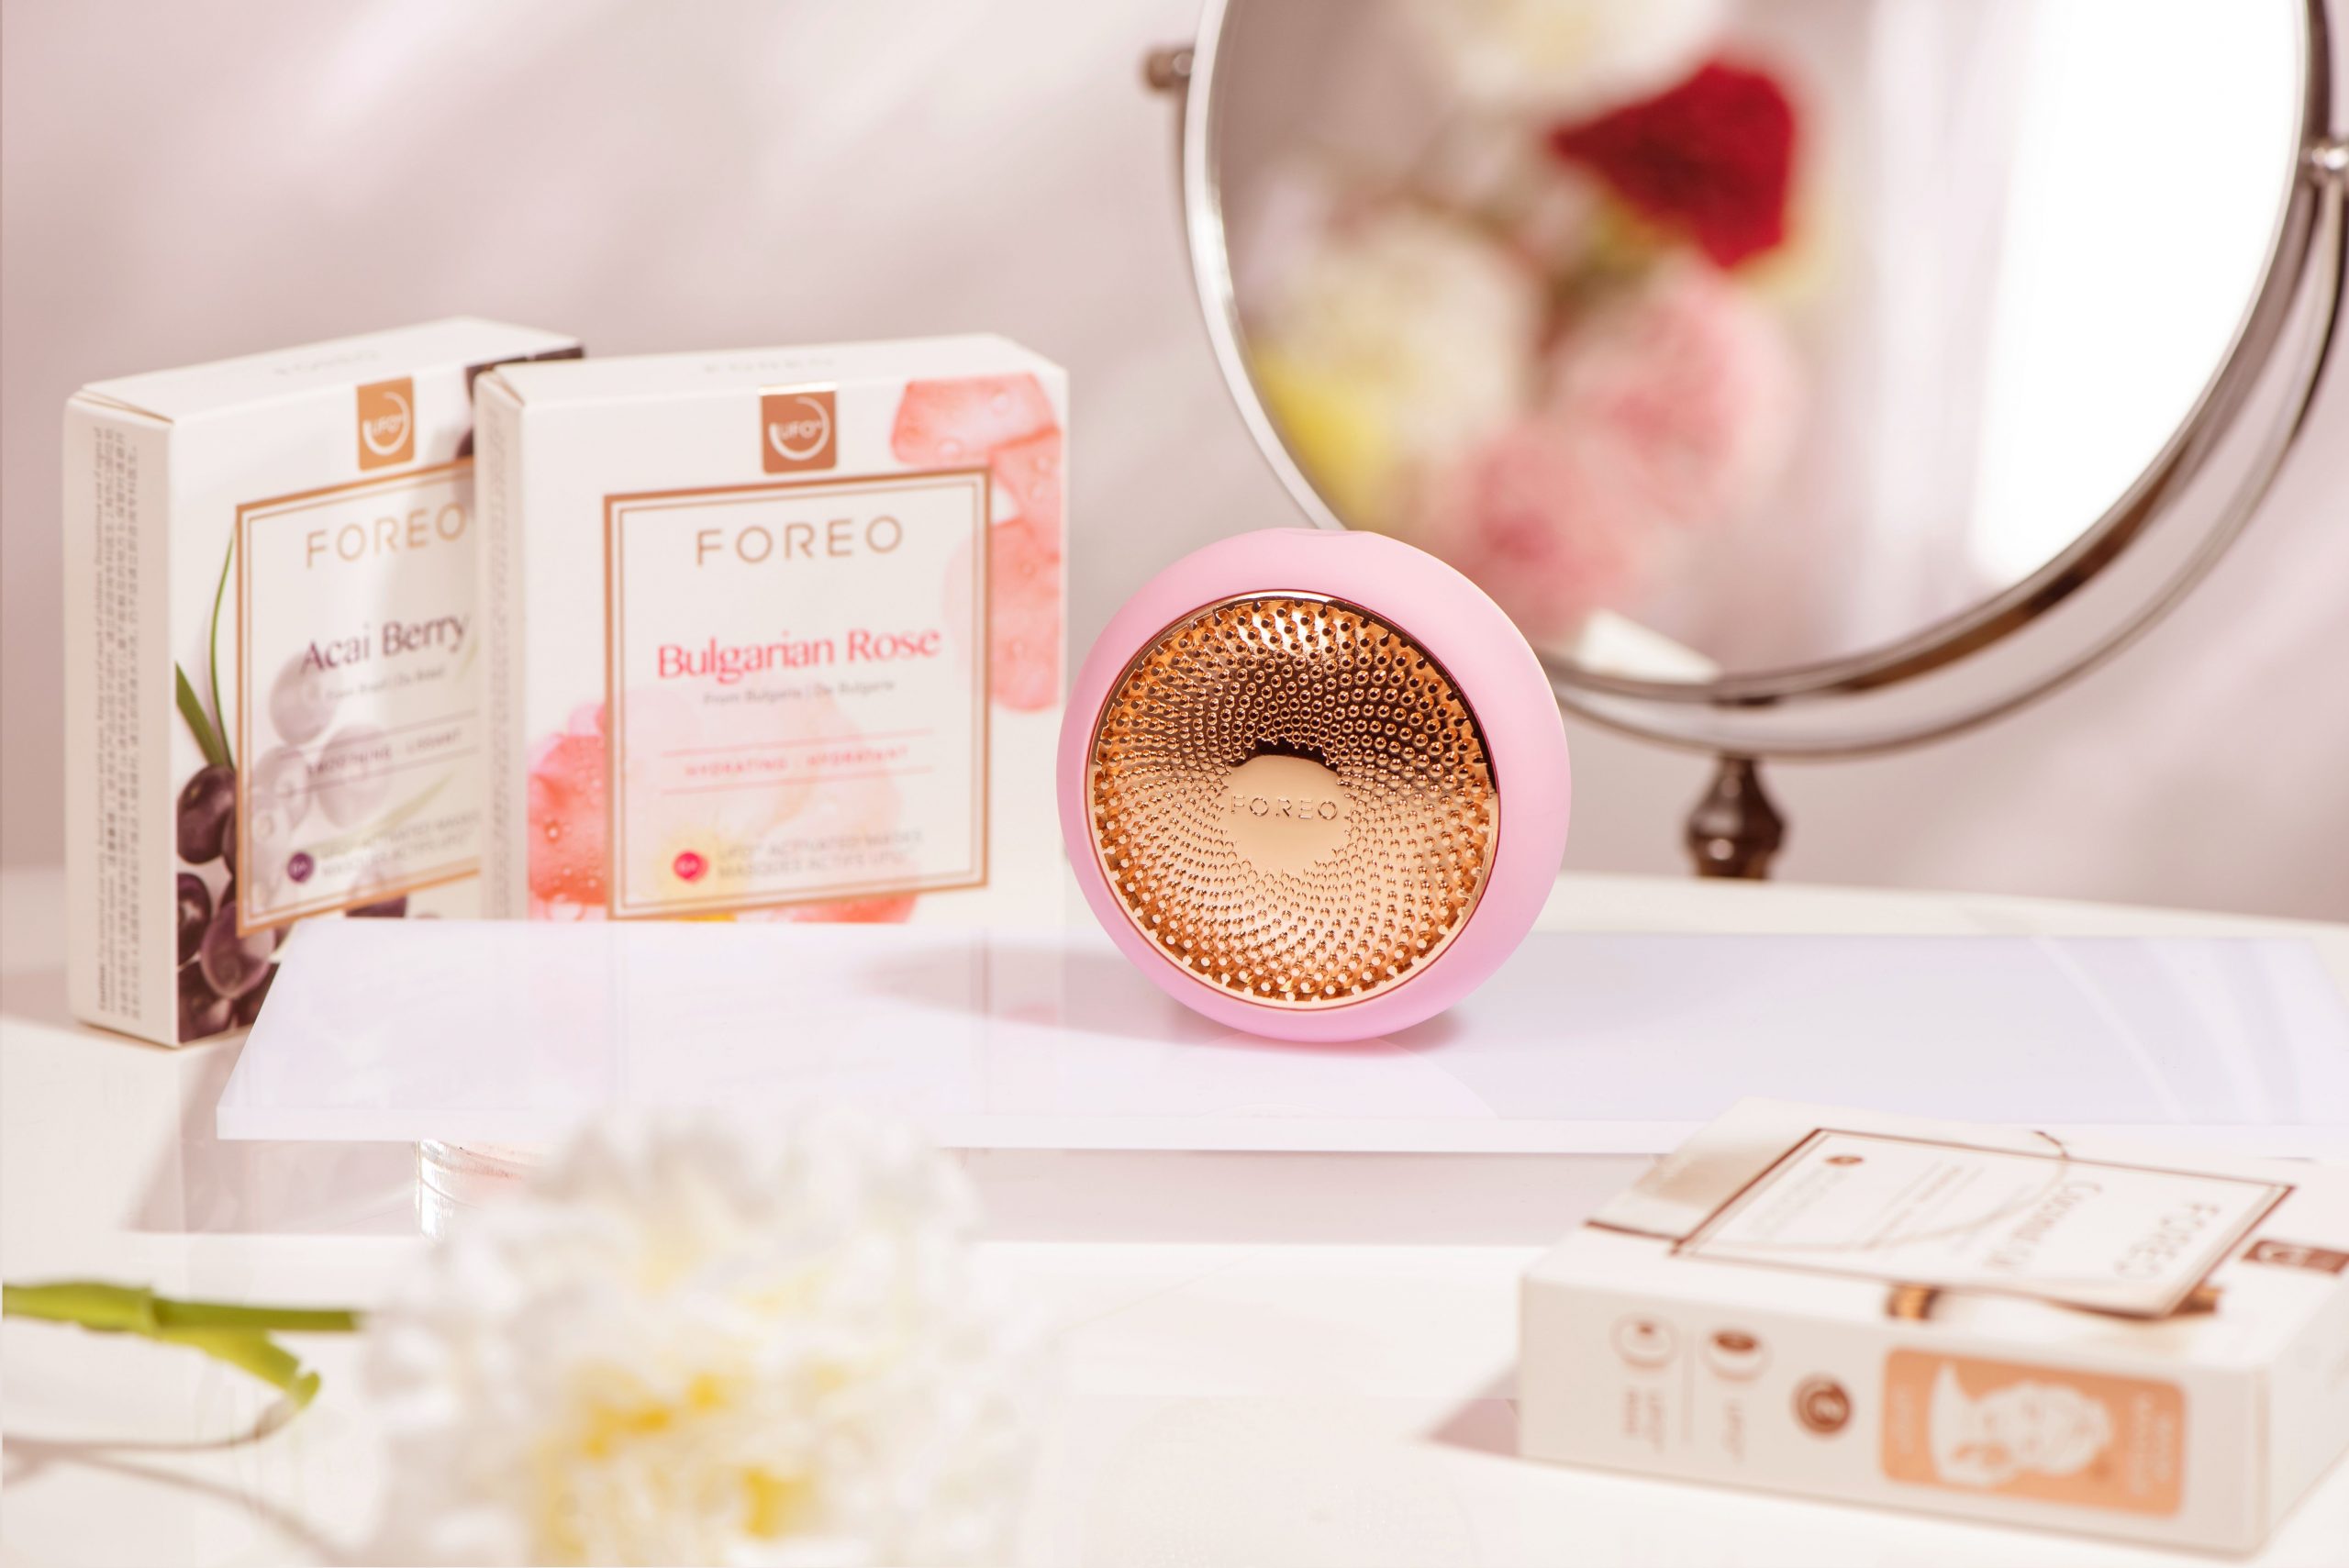 FOREO: after summer skincare routine